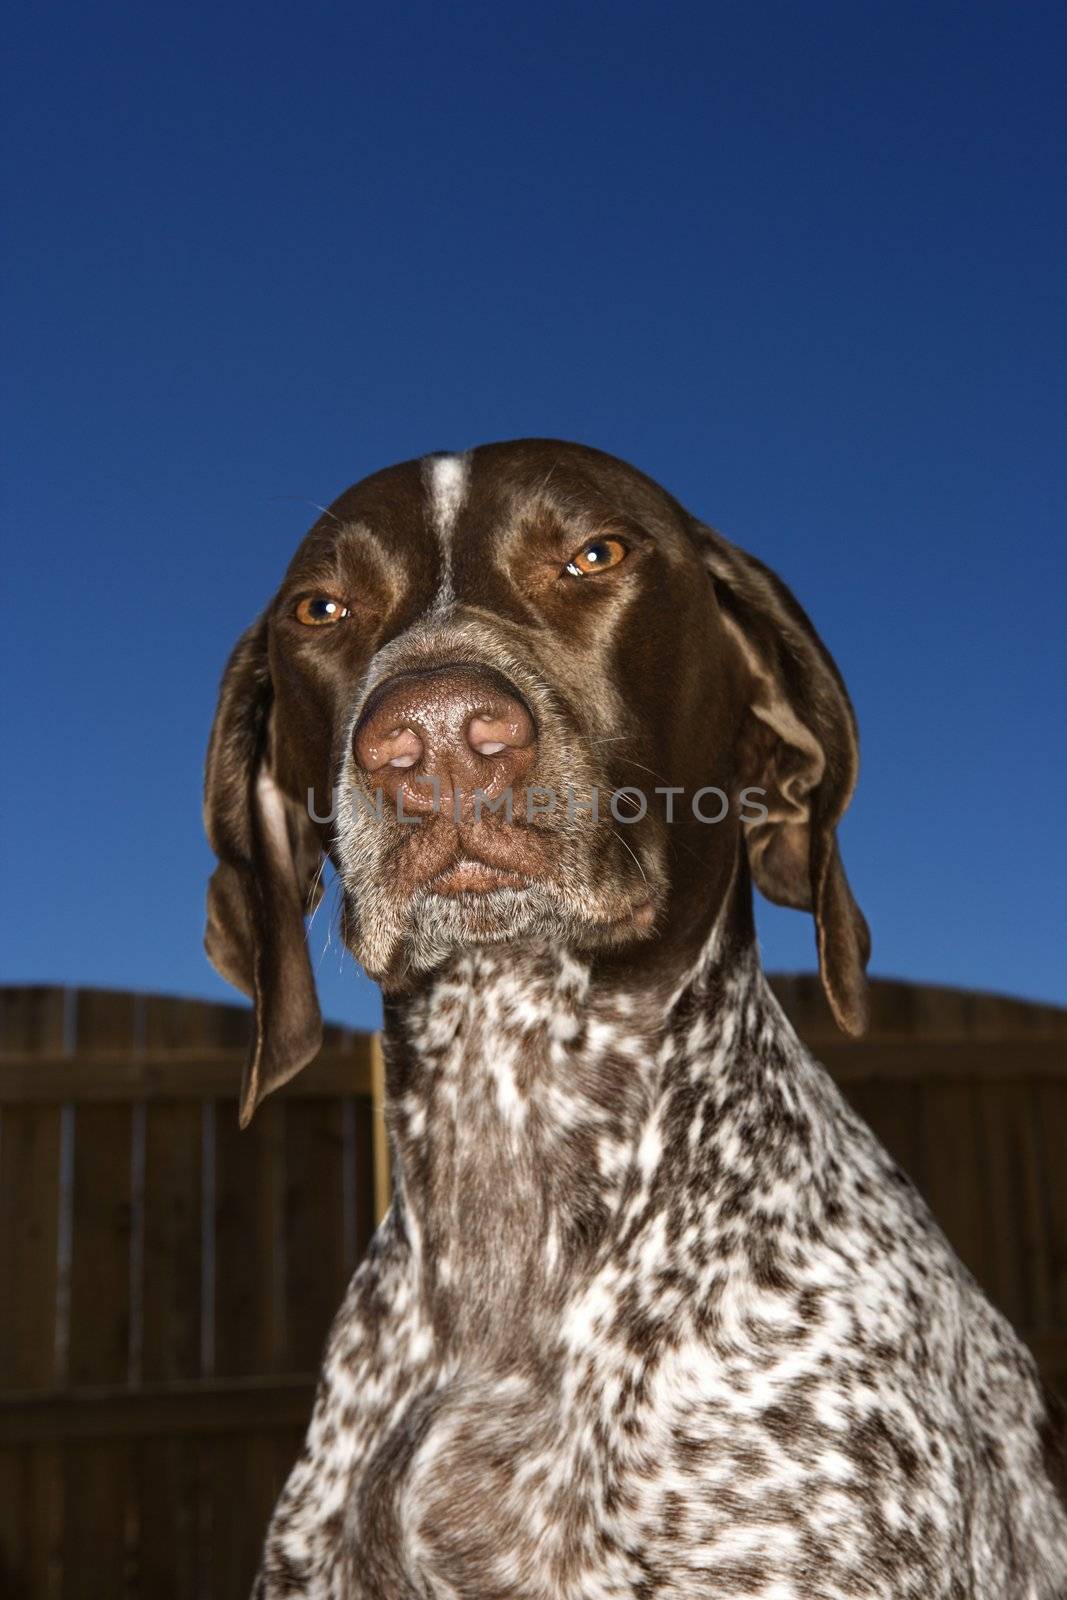 German Shorthaired Pointer with squinty eyes against blue sky.